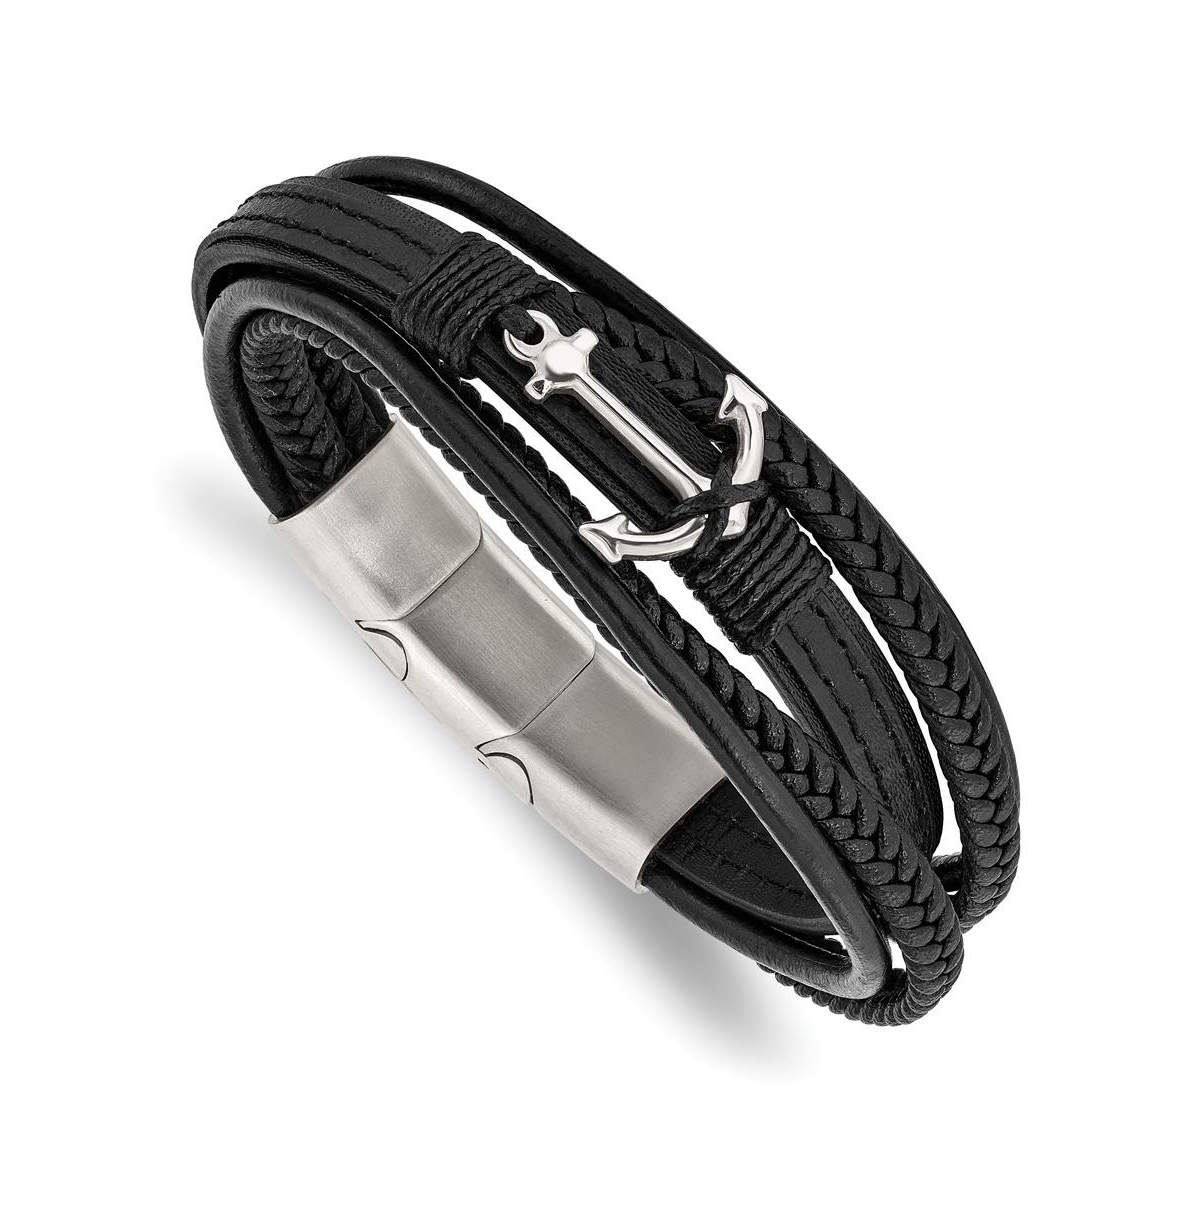 Stainless Steel Anchor Black Leather Bracelet with Extension - Black